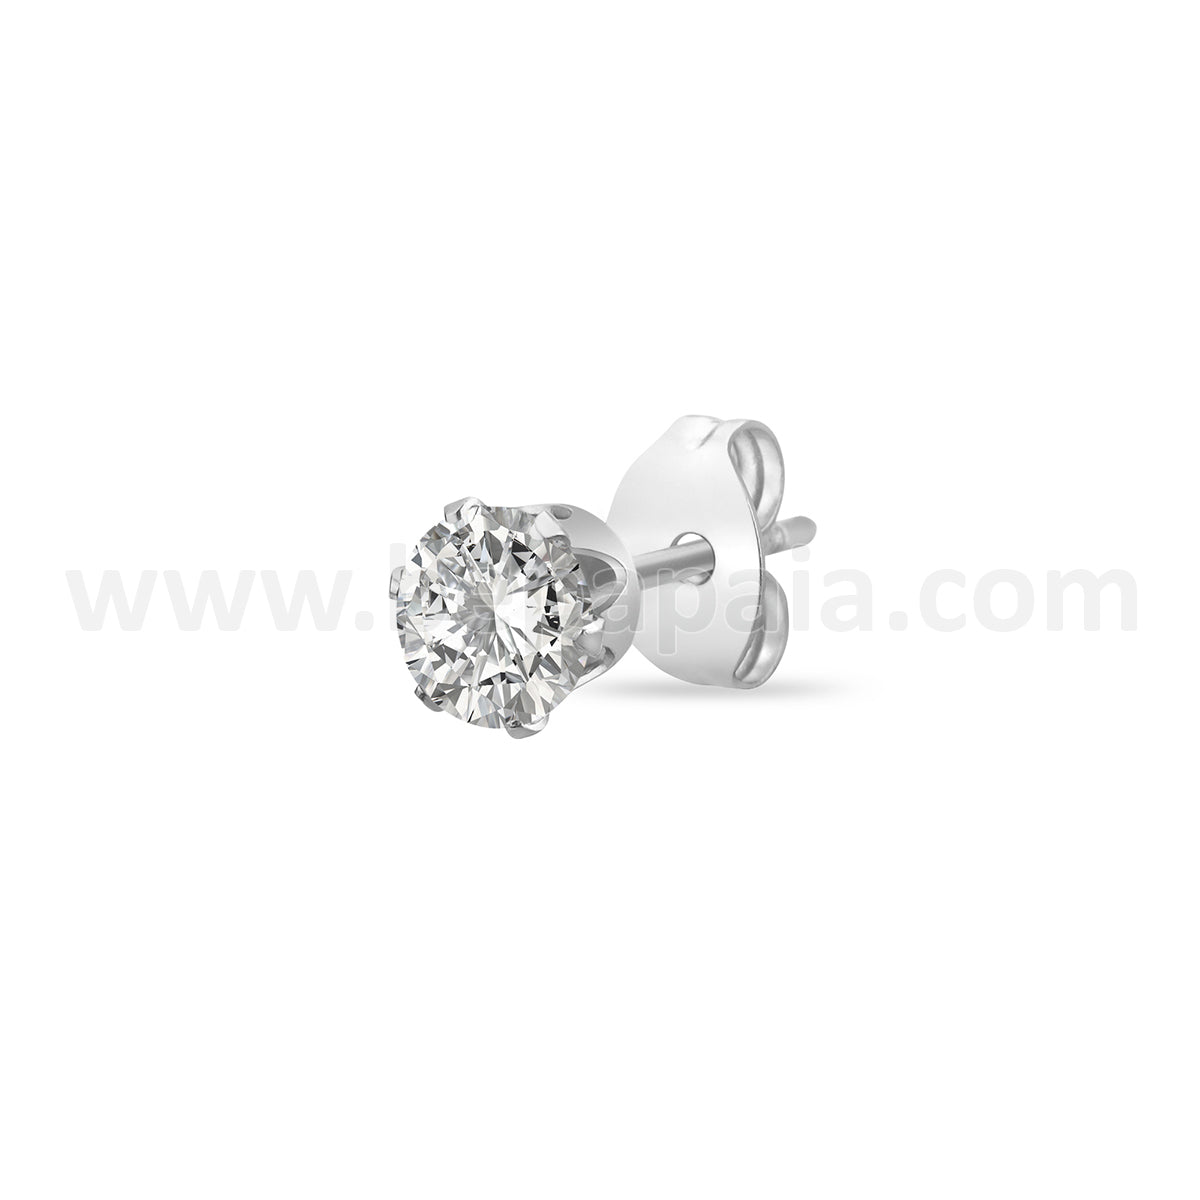 Steel ear studs with round-set cubic zirconia